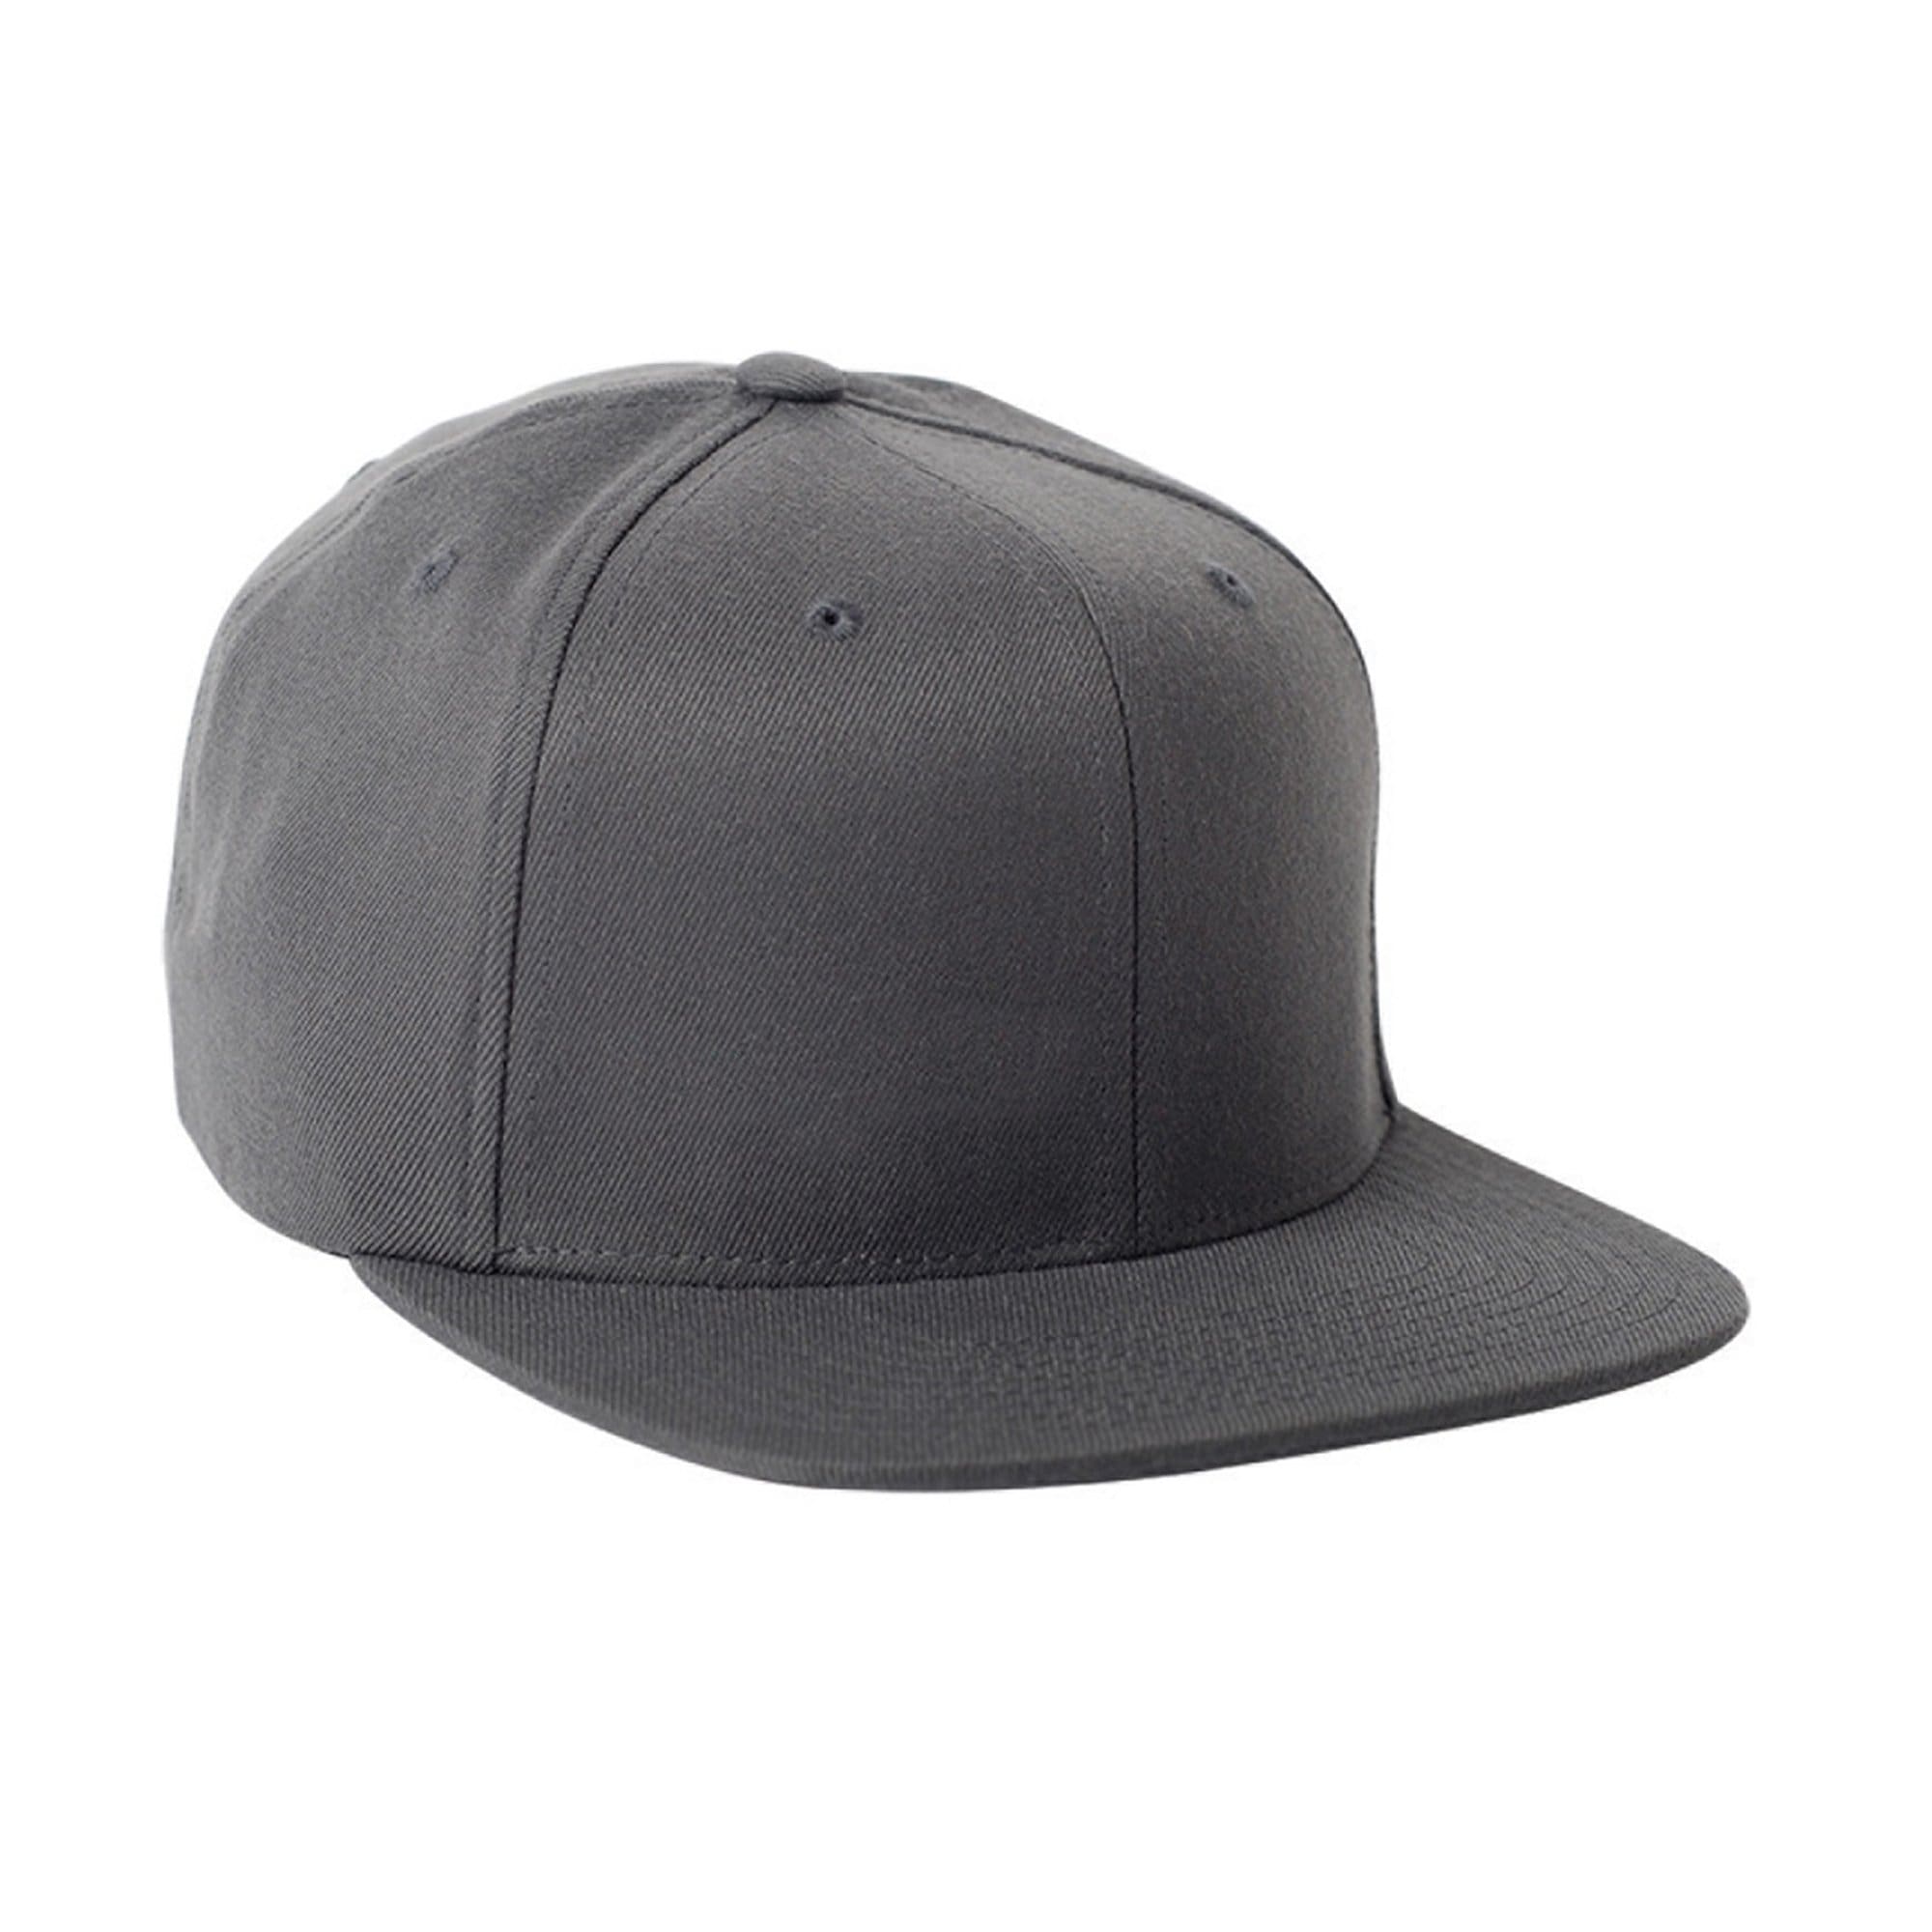 Stretch fit snapback cap - embroidered with your design in Whistler